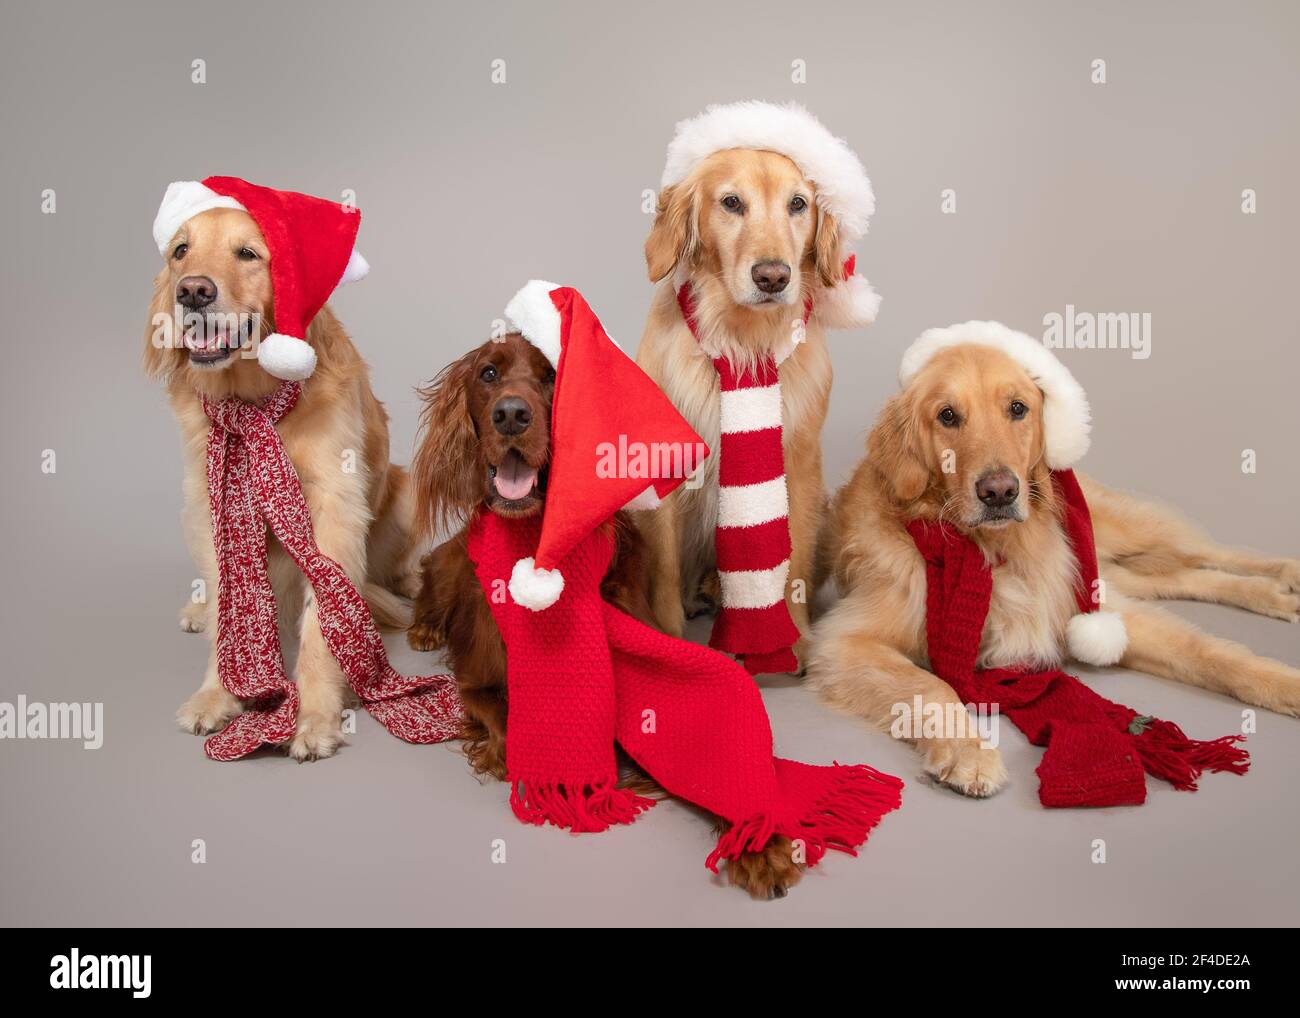 Golden retrievers and Irish Setter dogs dressed in Christmas hats and scarves Stock Photo